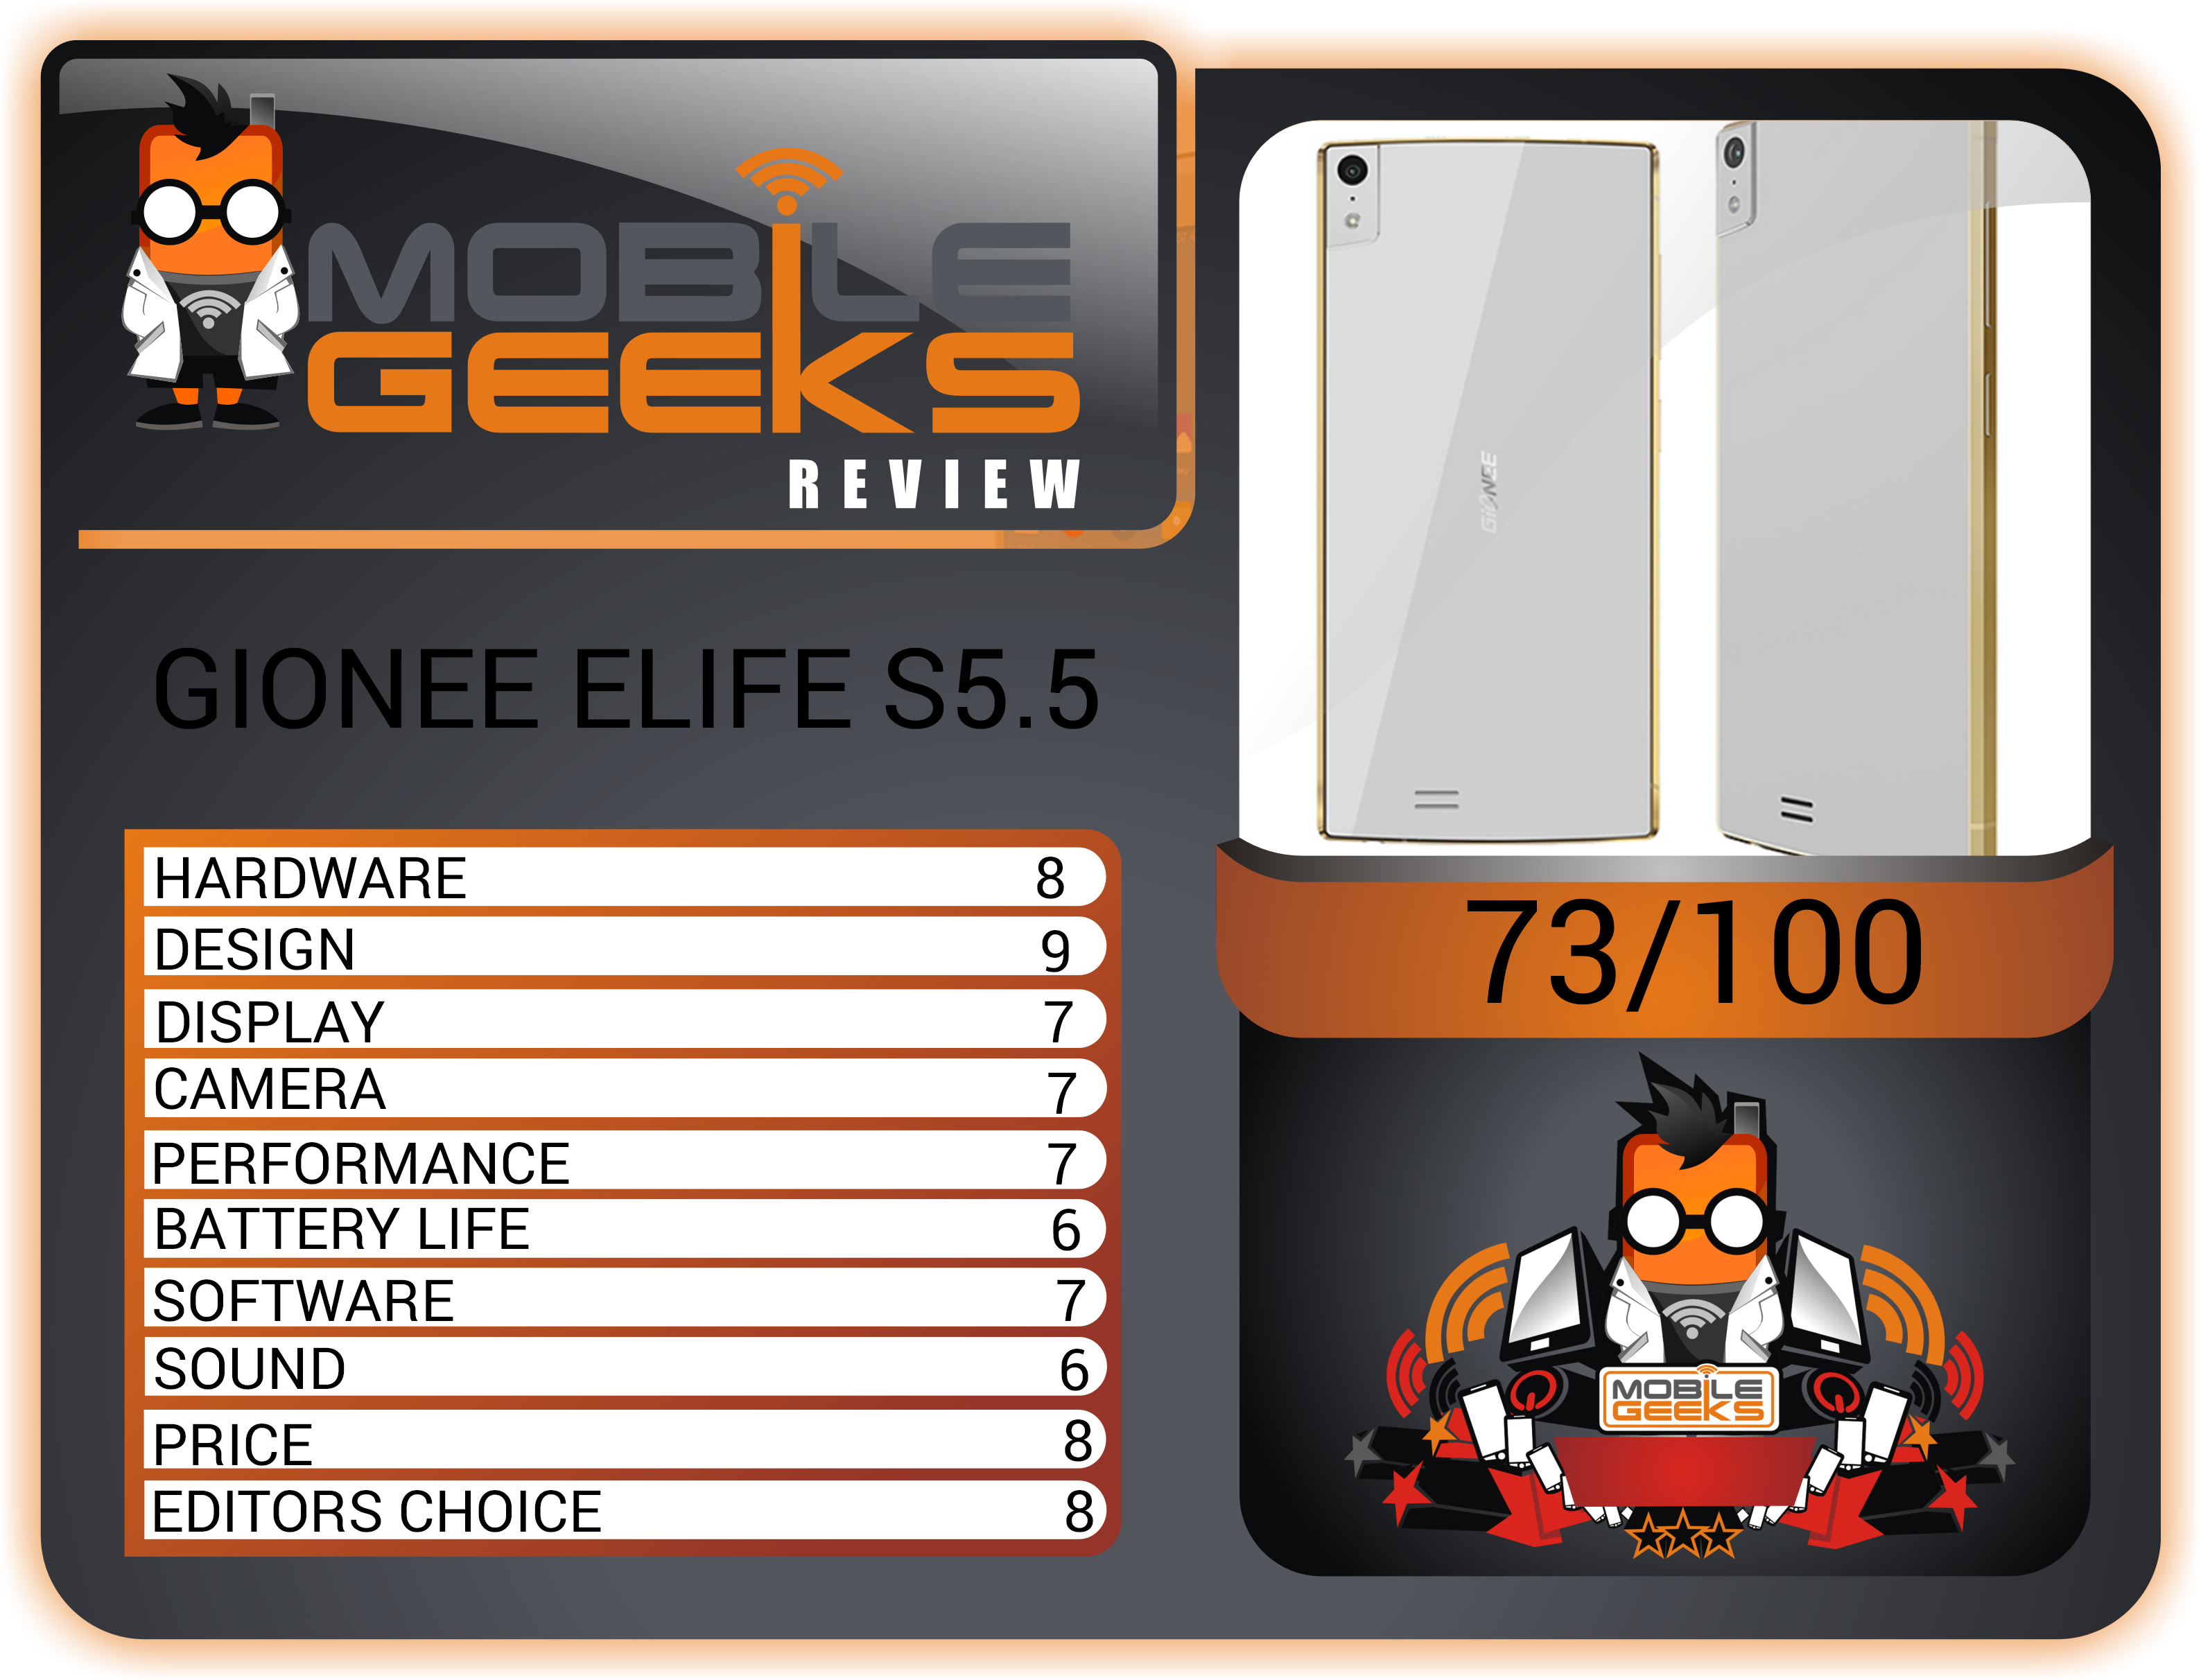 GIONEE-ELIFE-SCORE-CARD